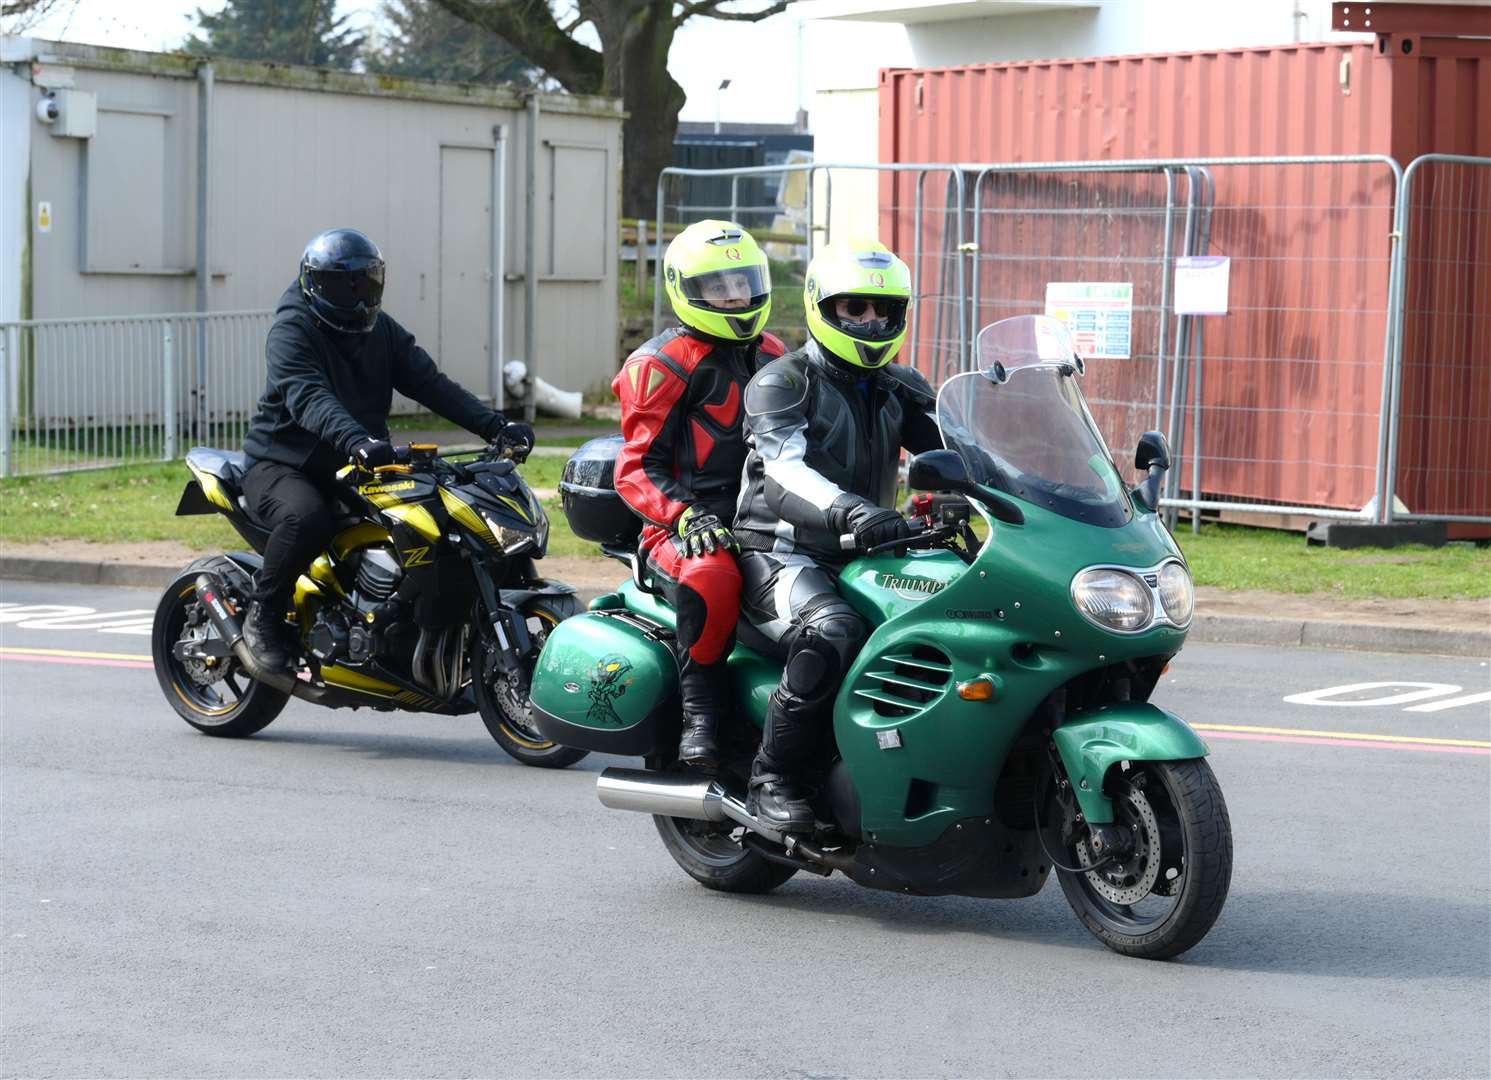 Bikers spreading some Easter cheer